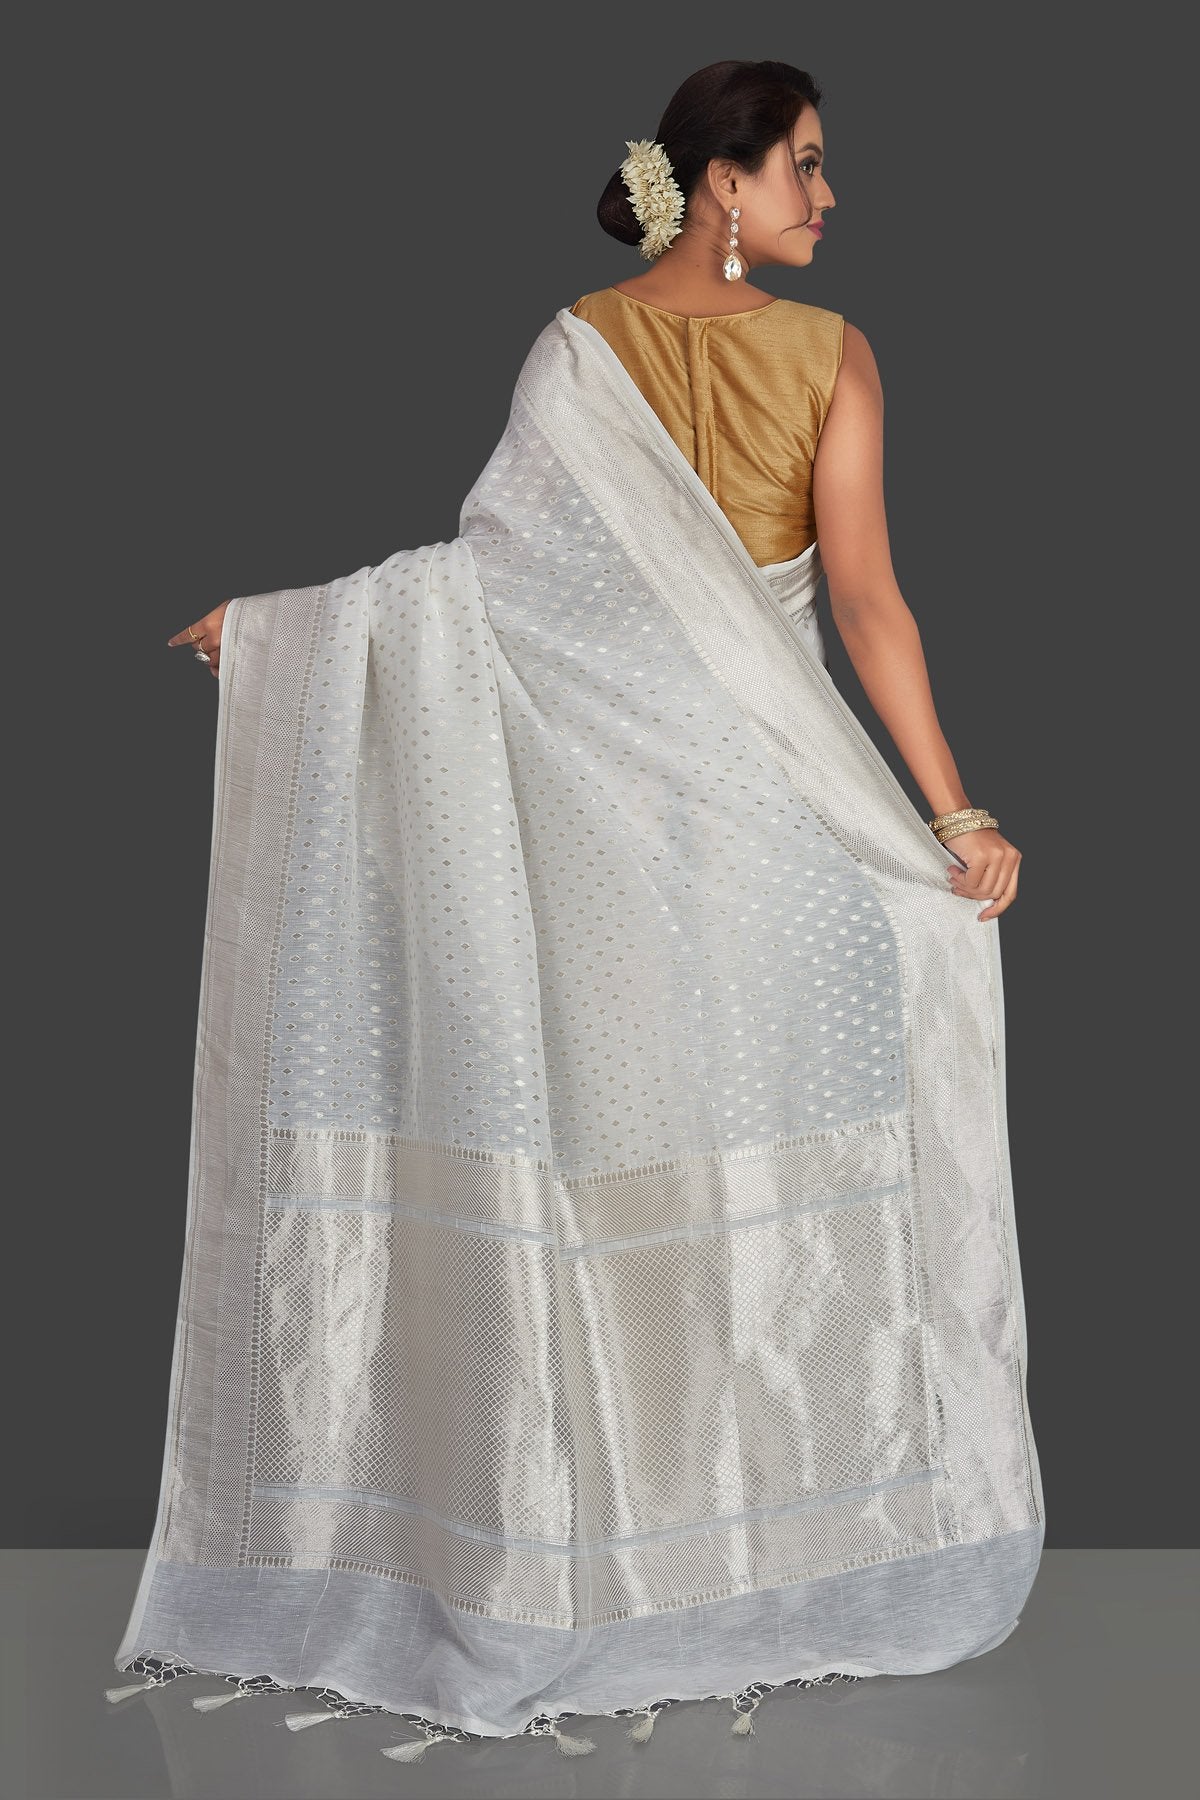 Shop white tassar georgette Banarsi saree online in USA with silver zari border. Radiate elegance with handloom sarees with blouse, tussar silk saris, Banarsi sarees from Pure Elegance Indian fashion boutique in USA. We bring a especially curated collection of ethnic saris for Indian women in USA under one roof!-back